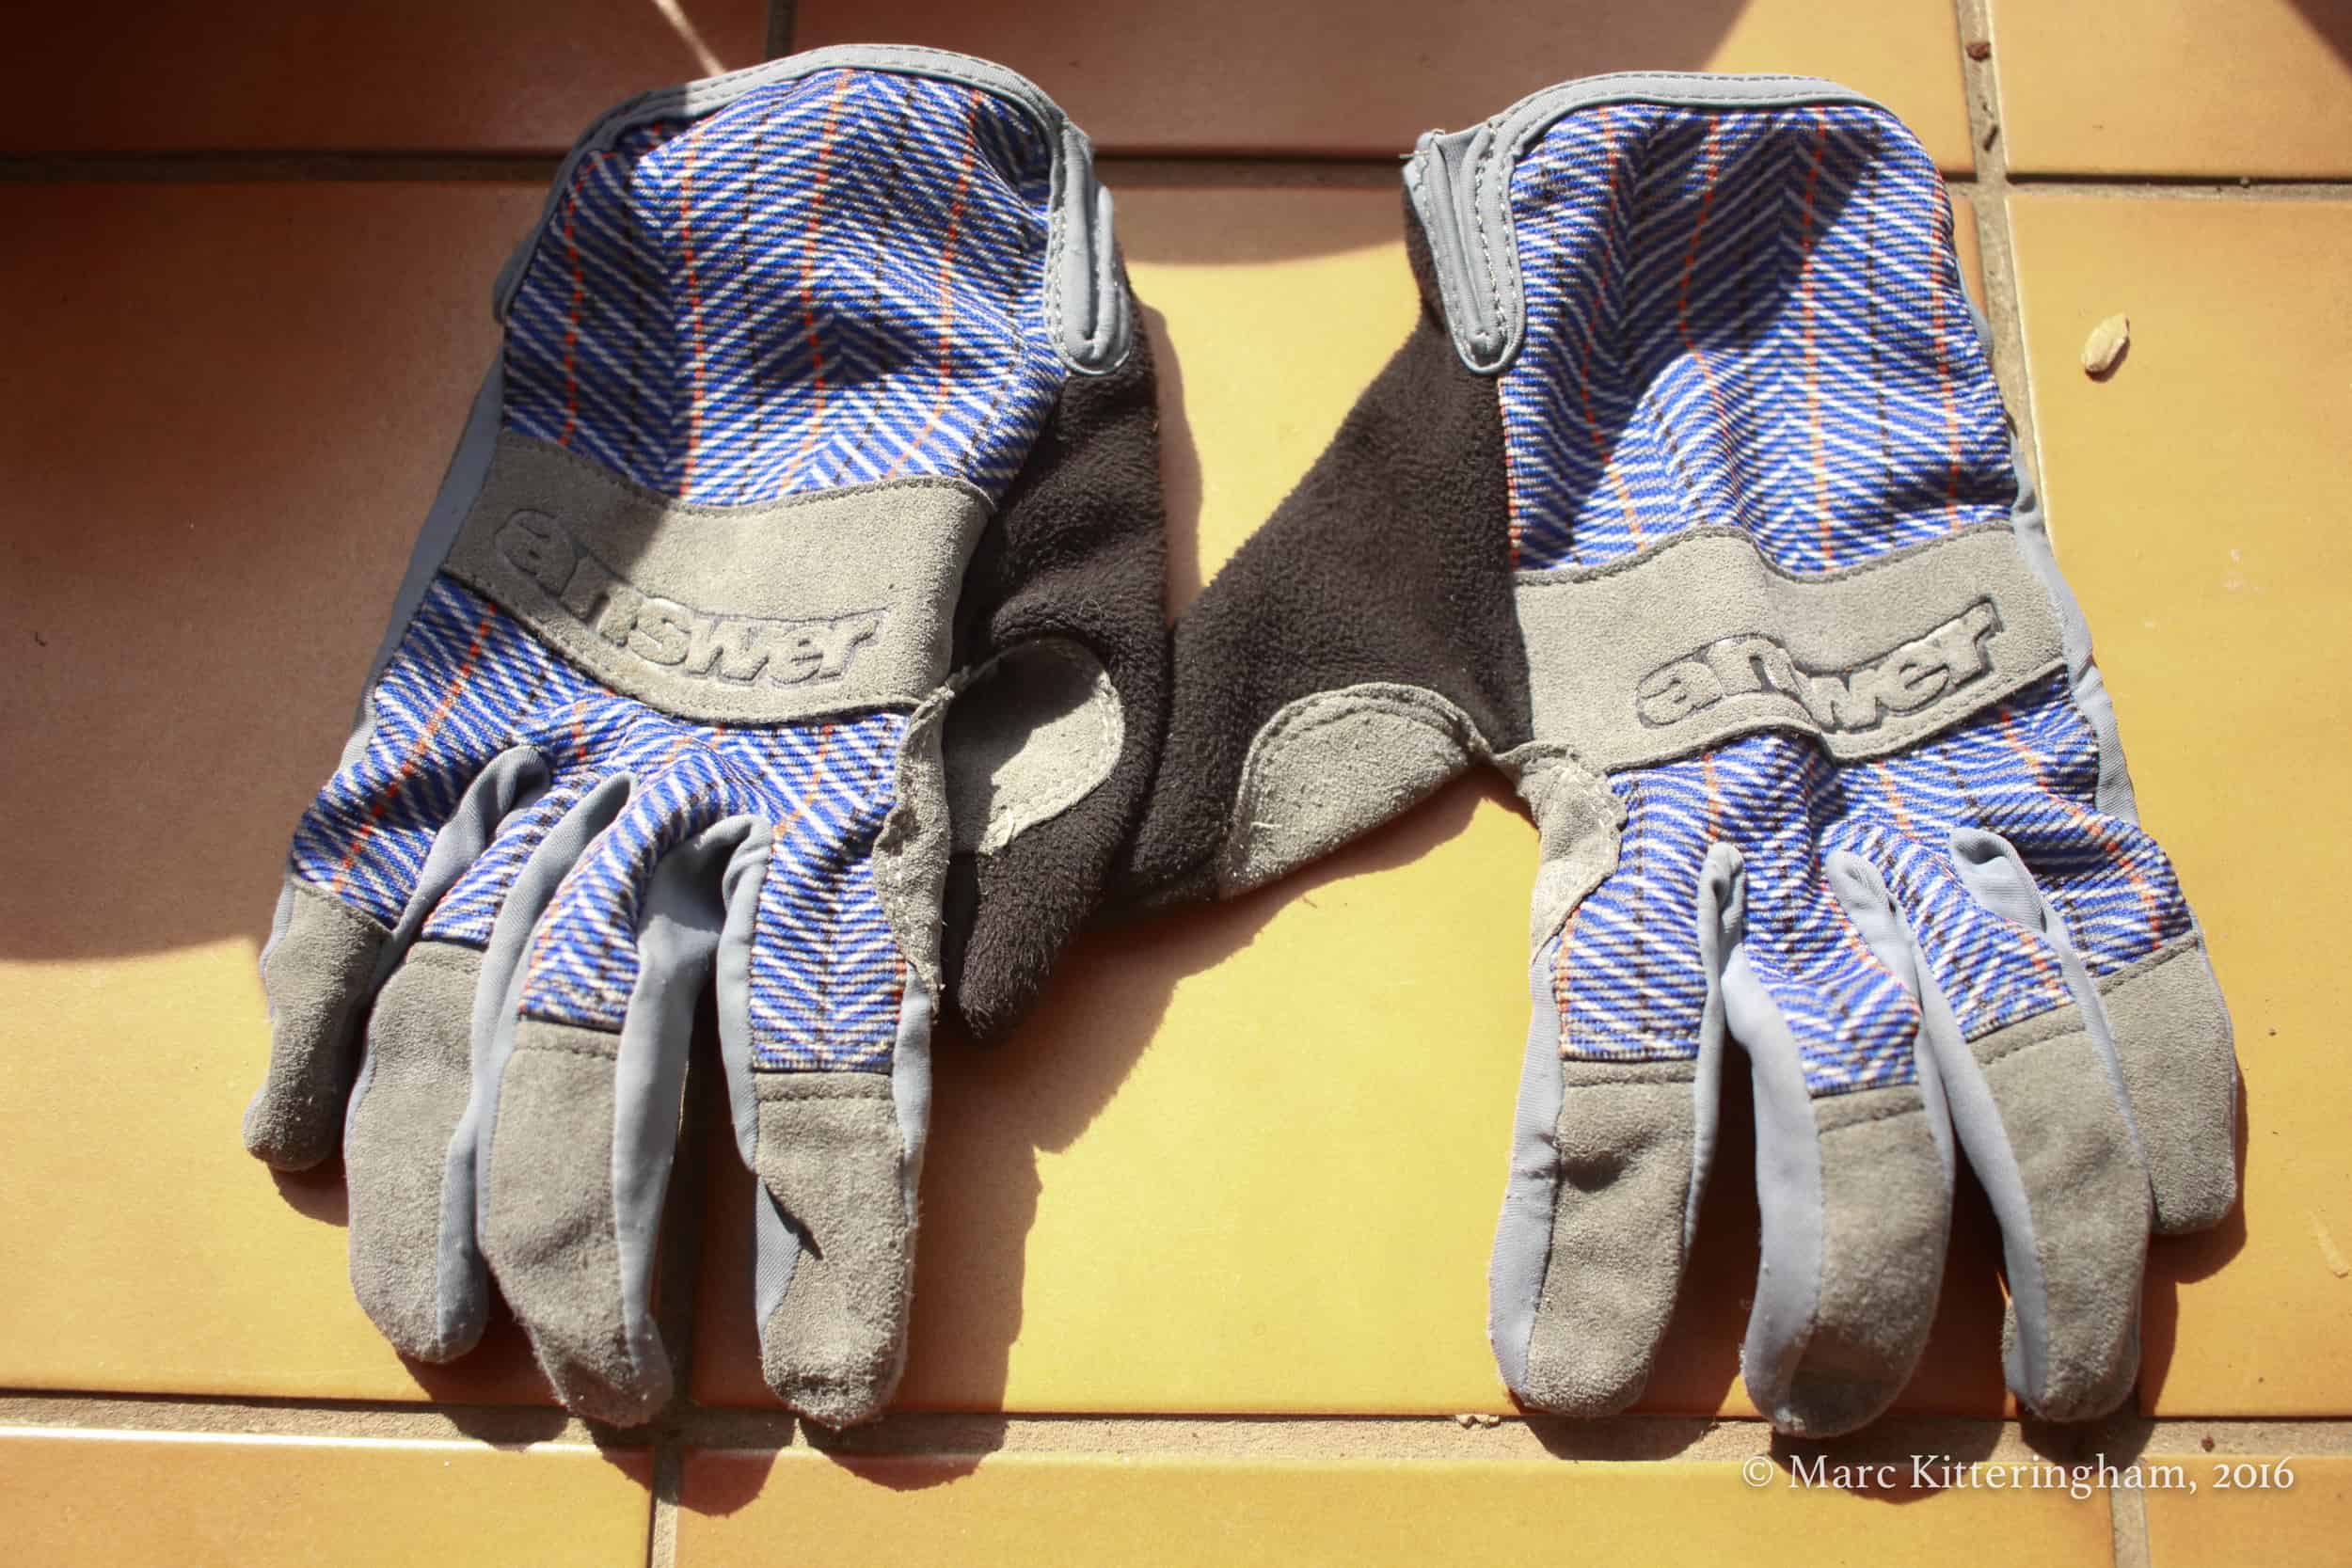 In-Depth Reviews of the 10 Best MTB Gloves in 2022